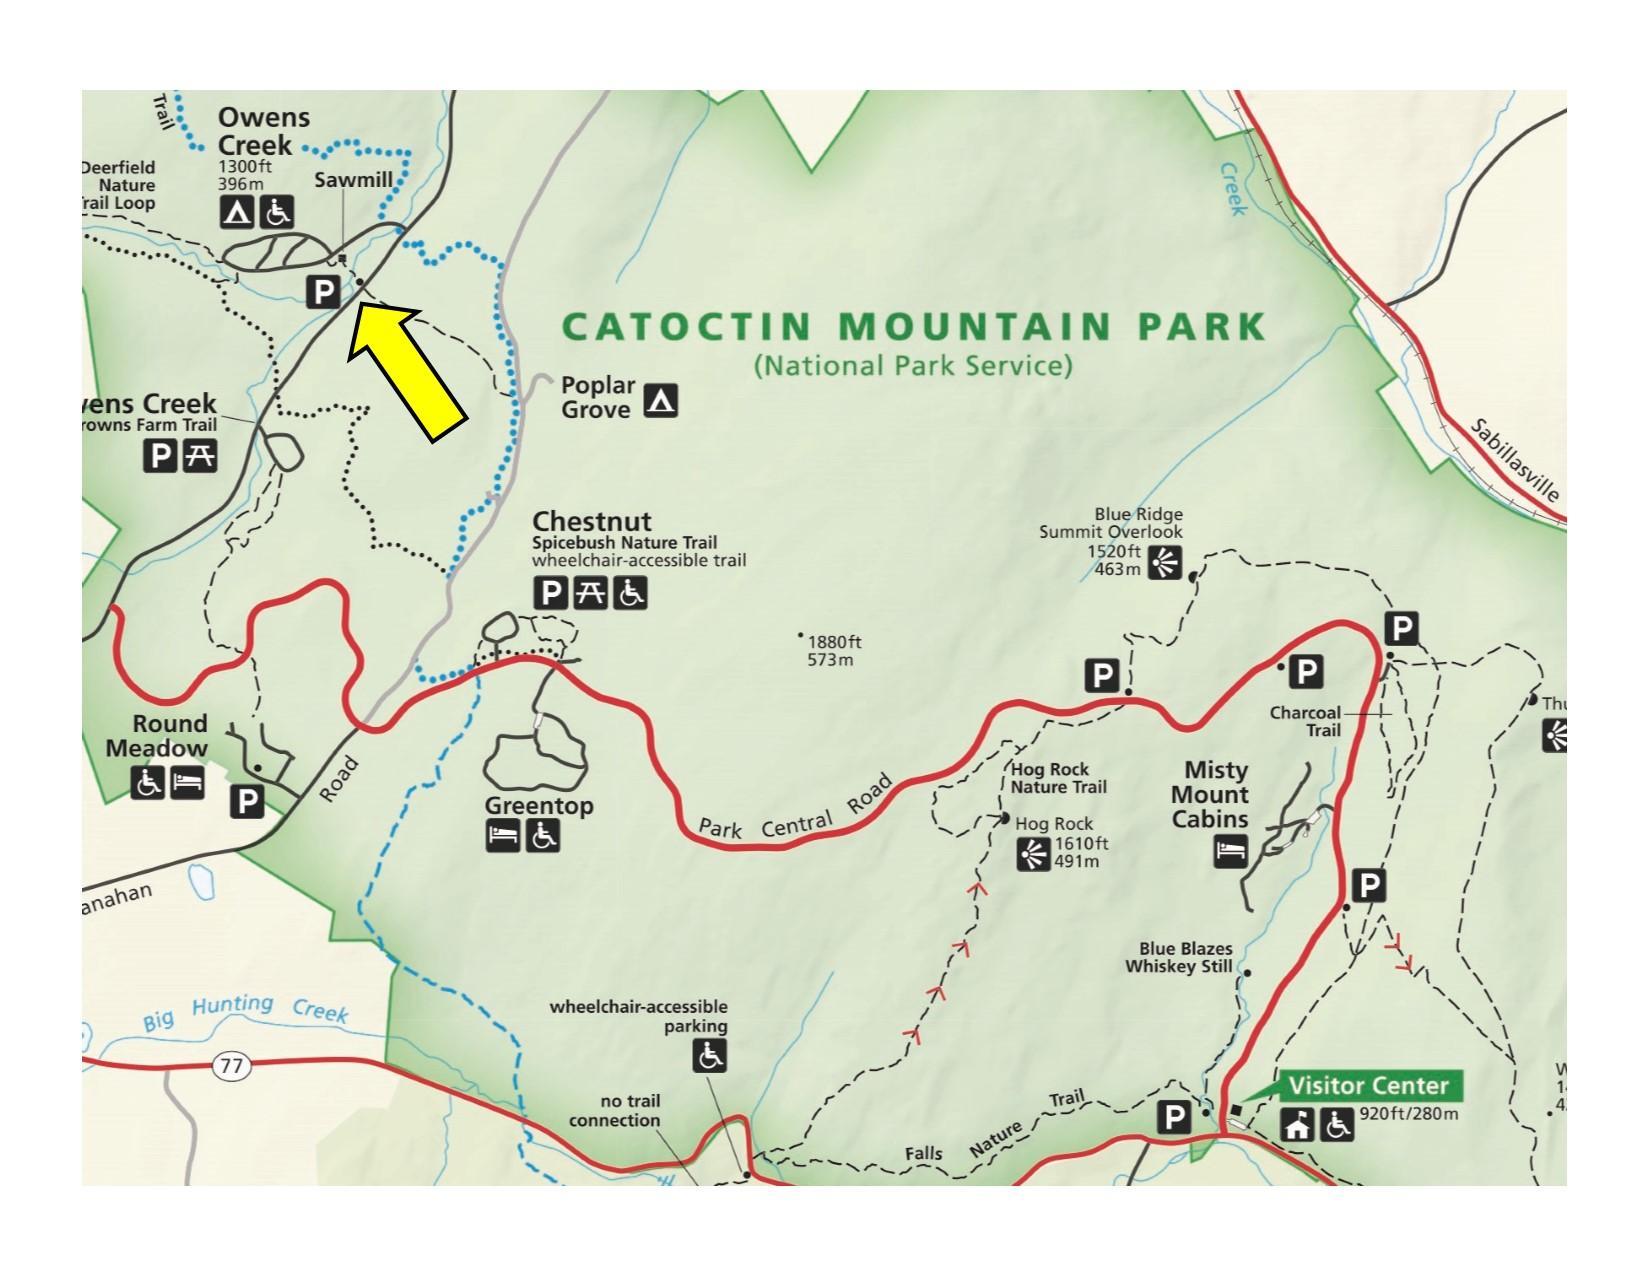 Park map with yellow area indicating location of parking area.